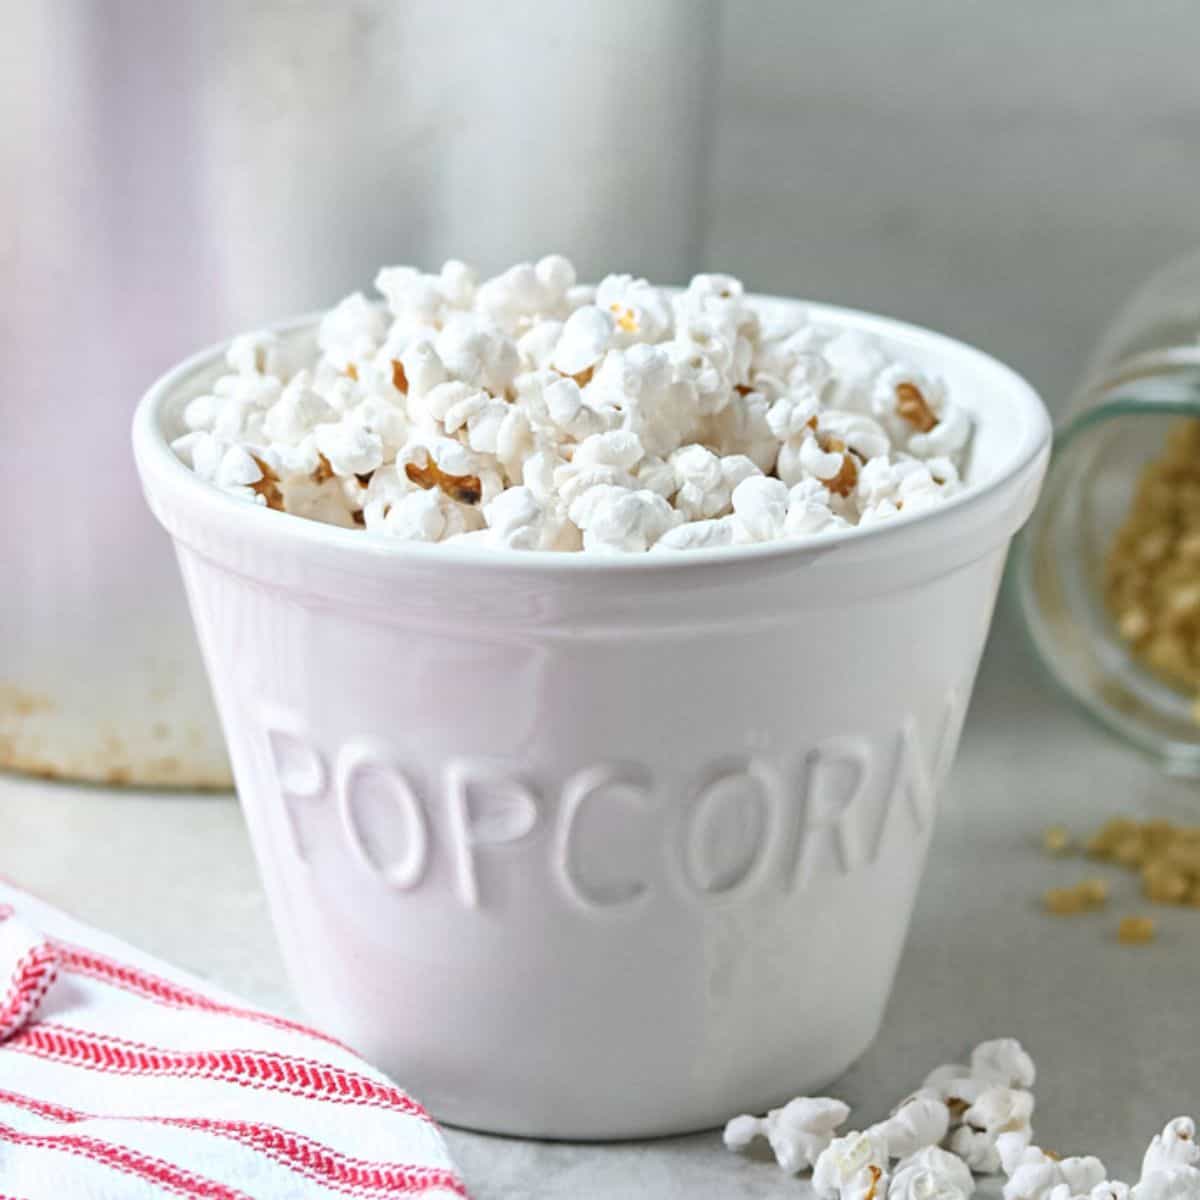 How to Make Movie Theater Popcorn at Home, According to Professionals